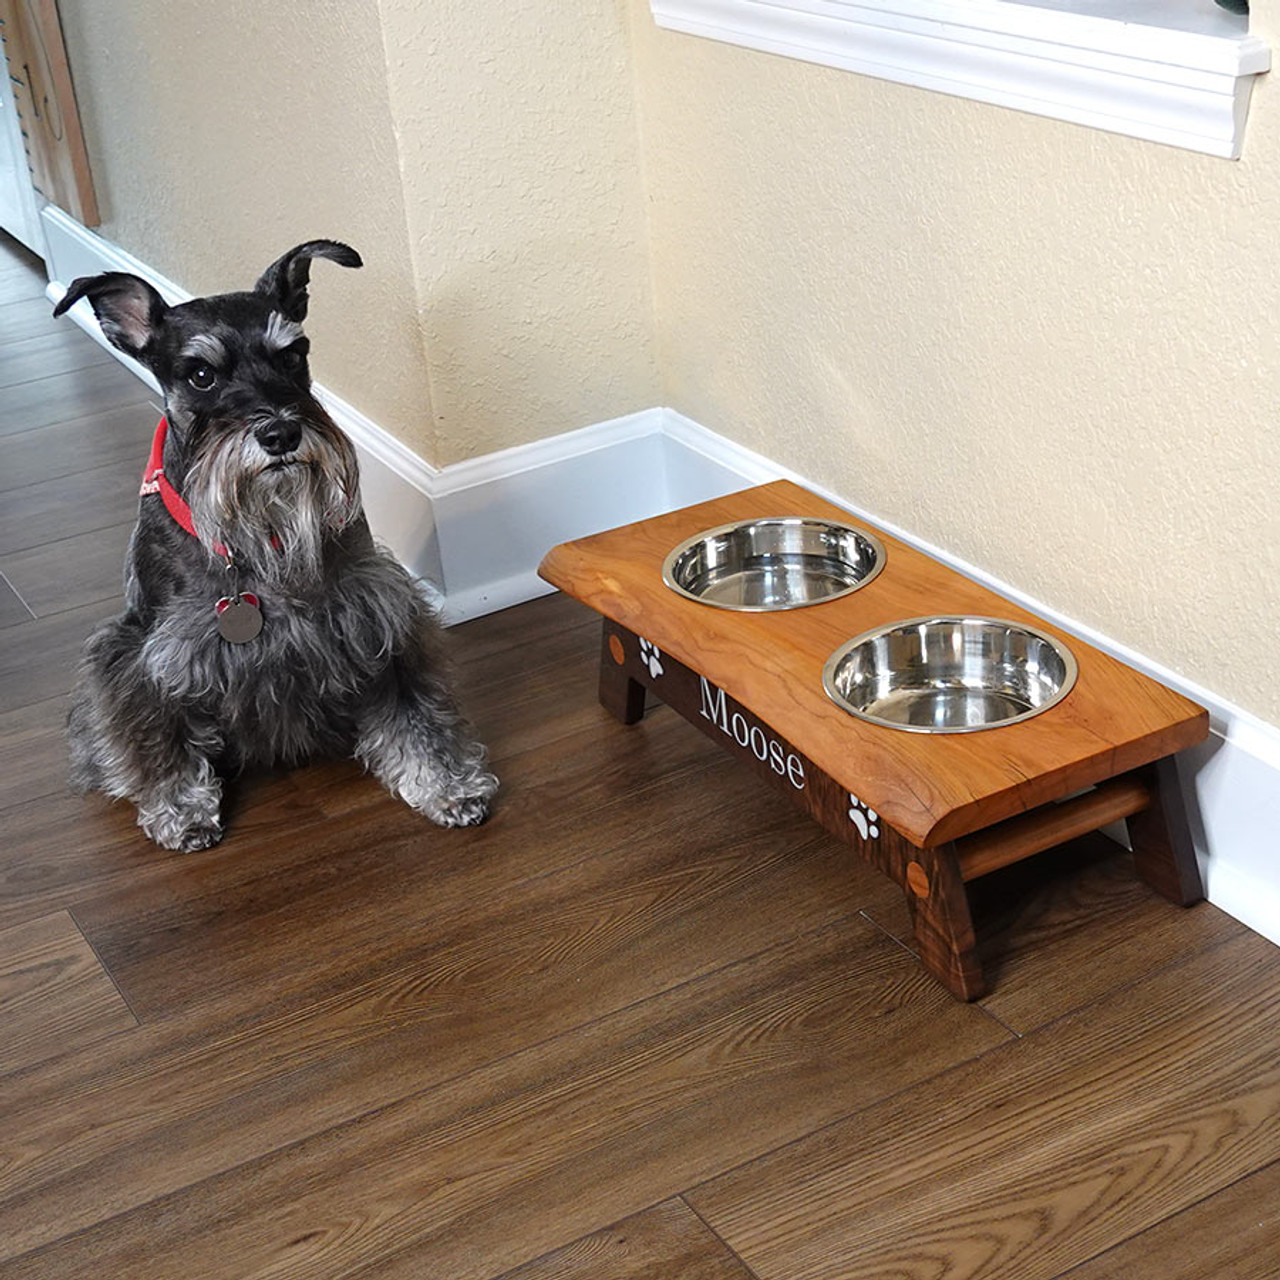 CNC Dog Bowl Stand Plans - Download & Customize